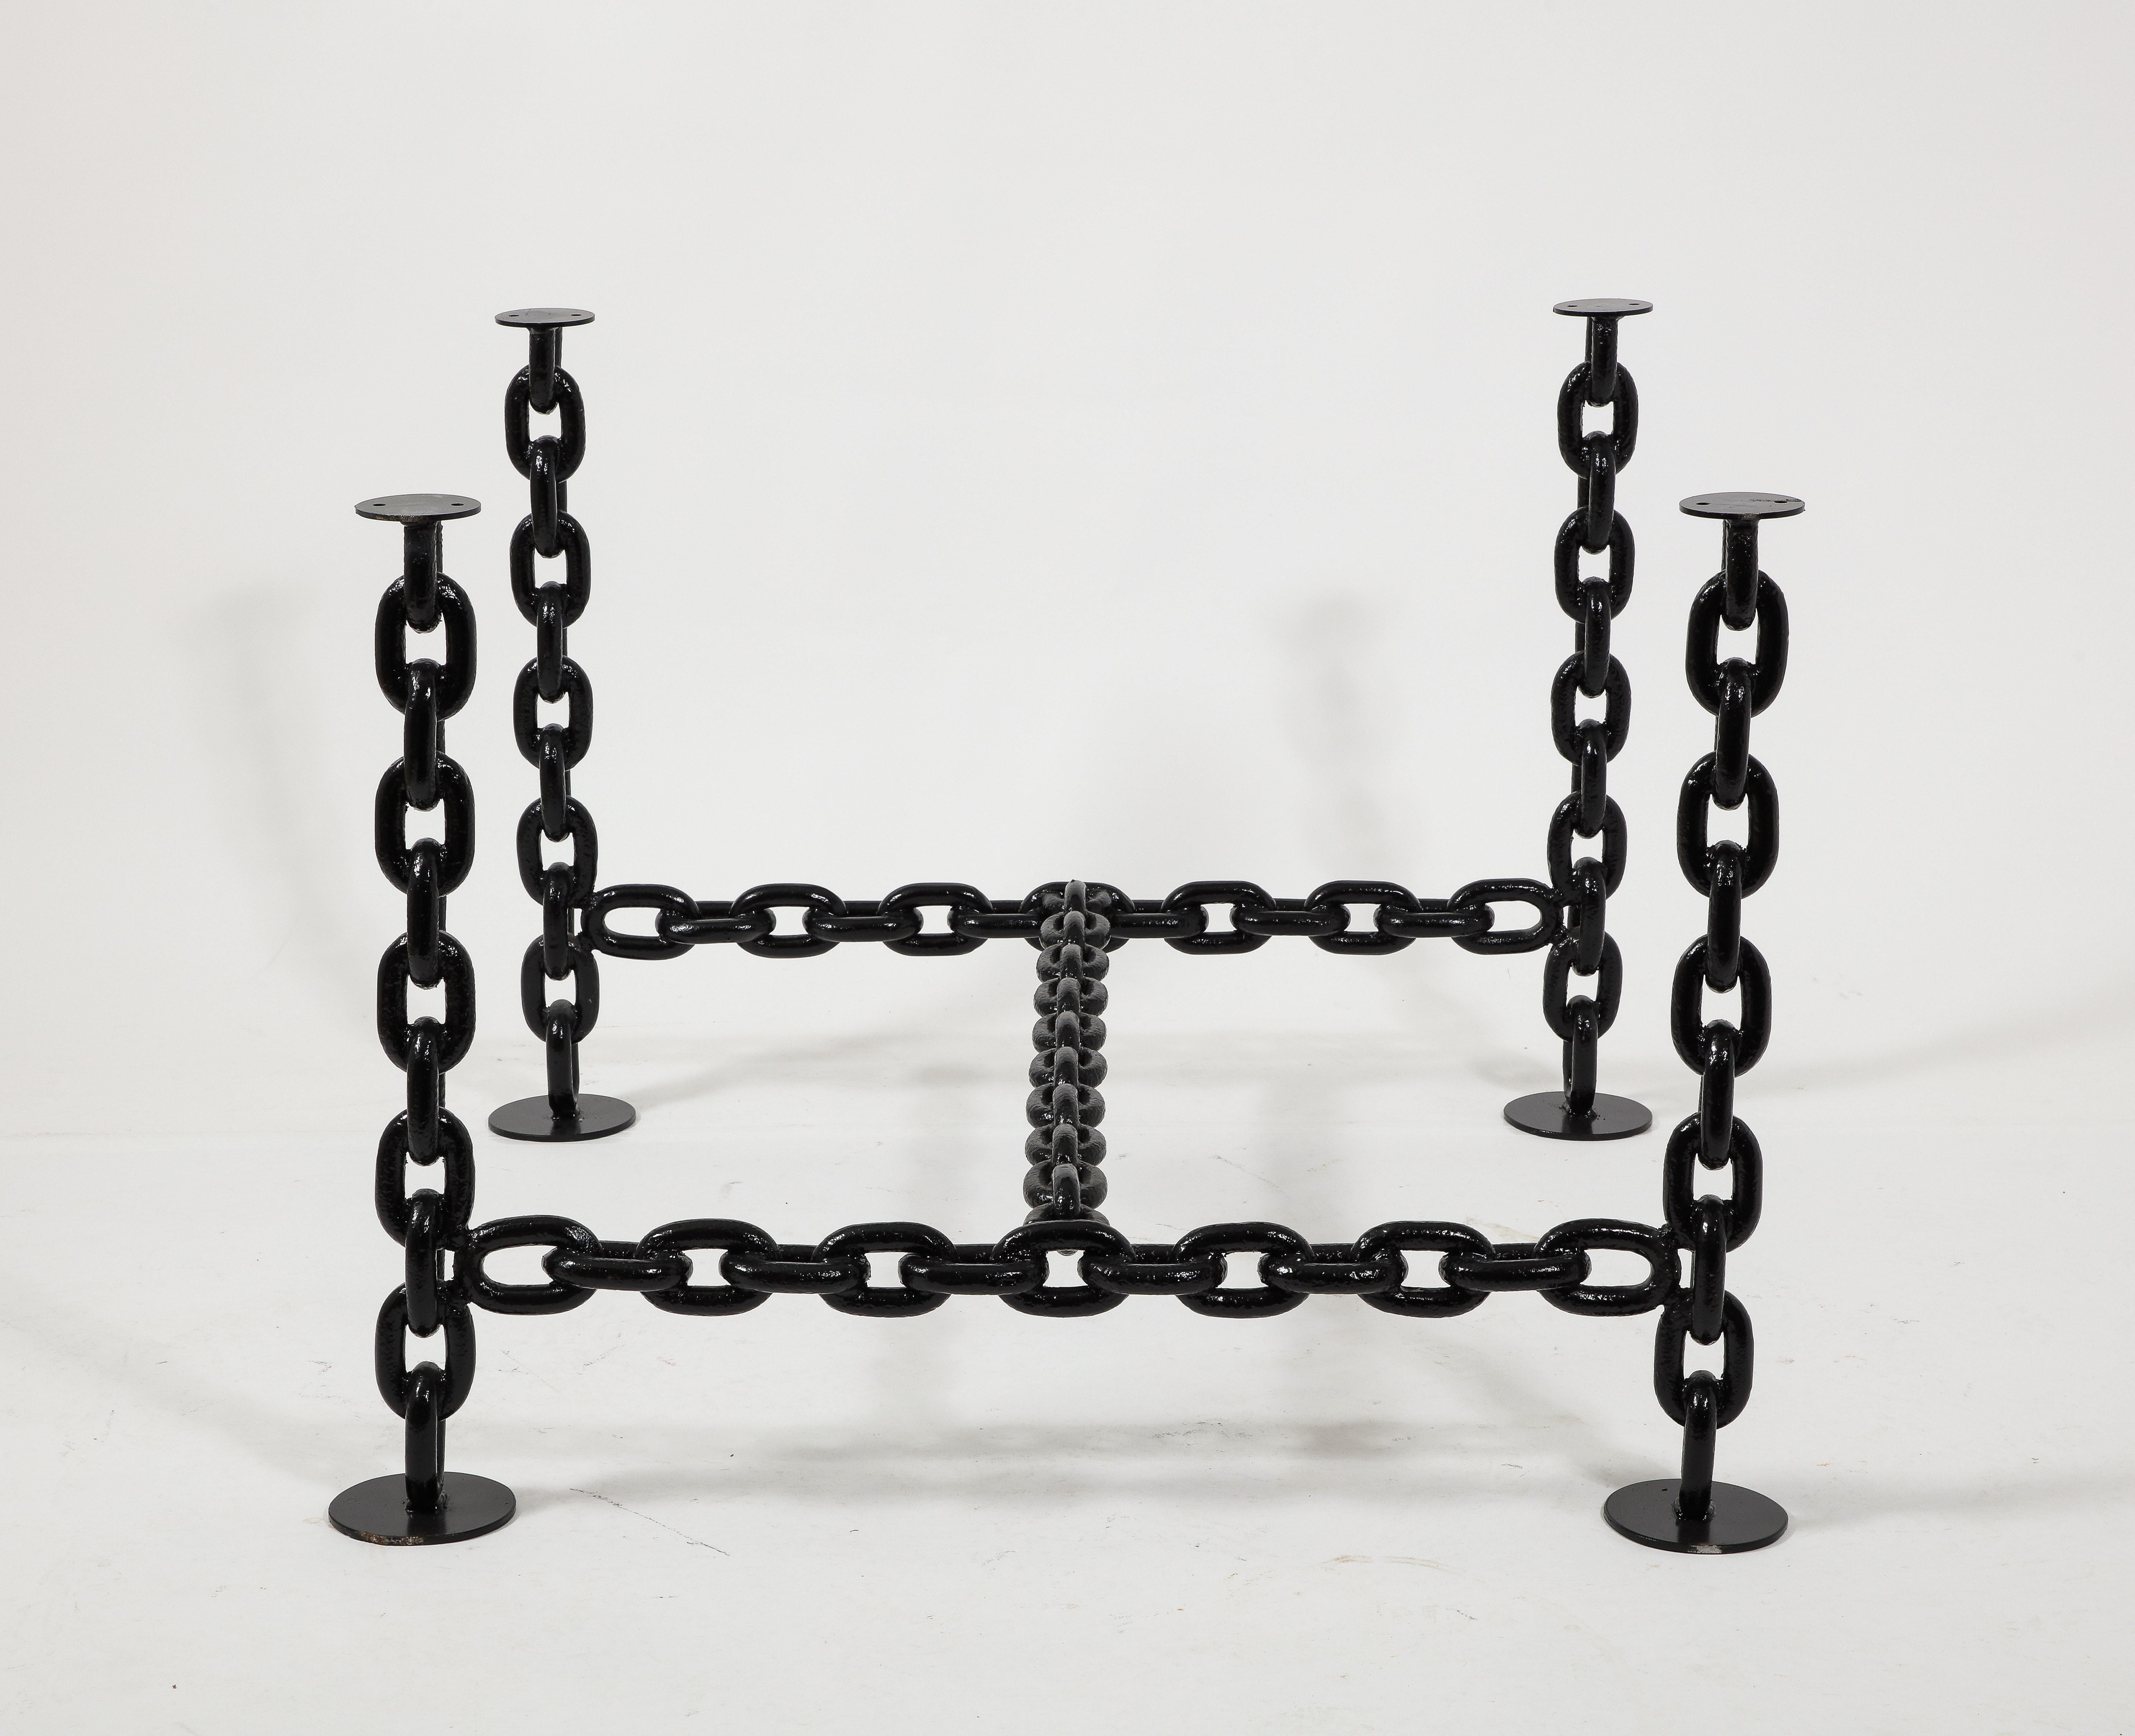 Black Lacquered Brutalist Marine Chains Dining Table Structure - France 1970s For Sale 5